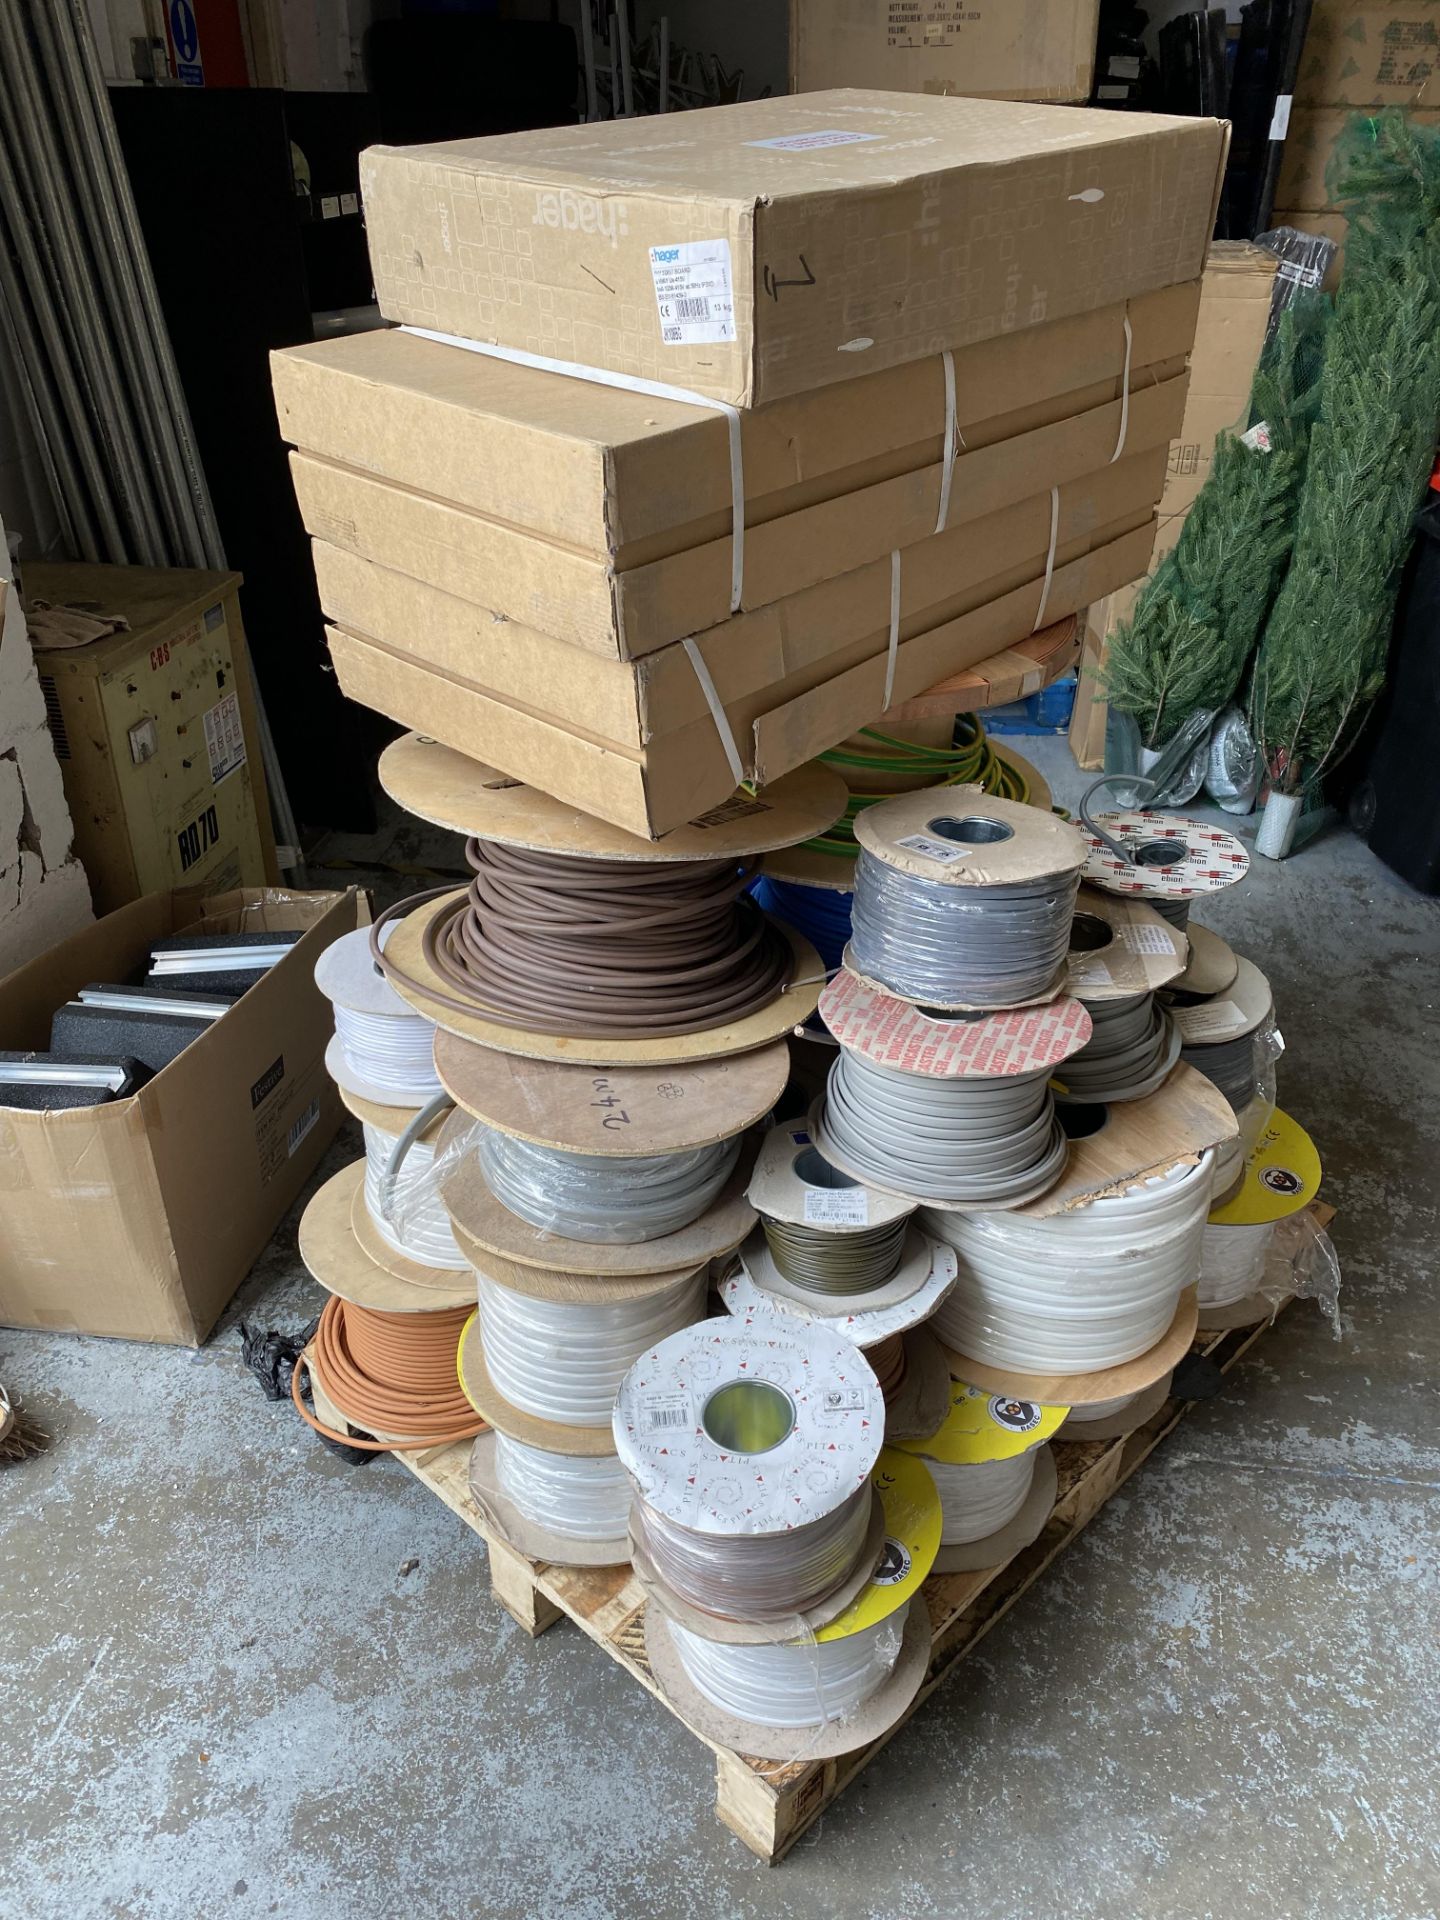 Bulk lot of ex-distributer electrical component stock, 12 pallets - Image 11 of 12